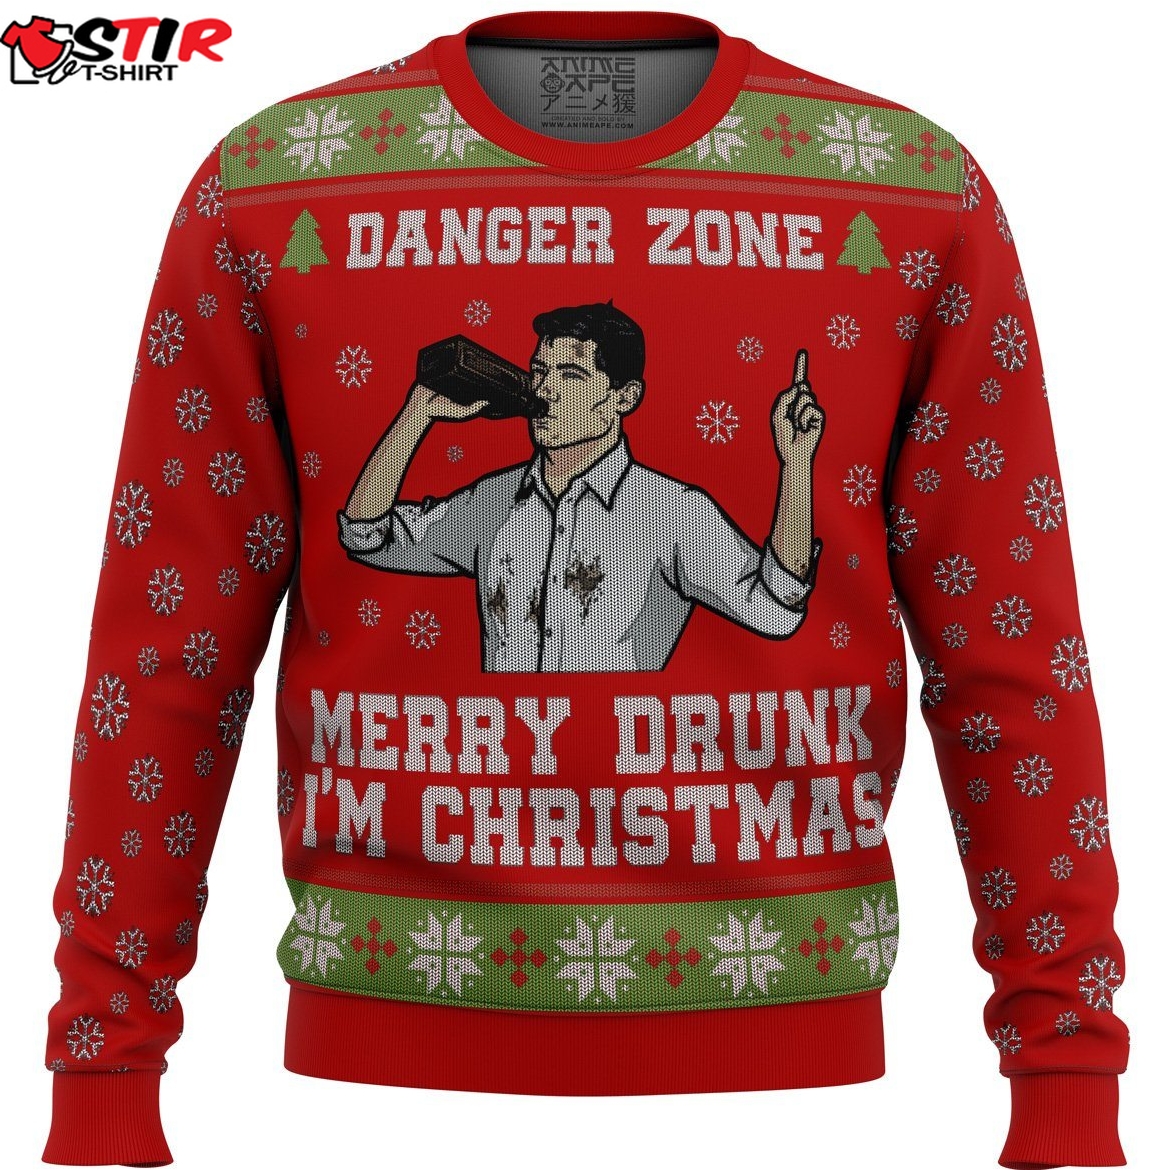 Merry Drunk IM Christmas Sterling Archer Ugly Christmas Sweater Stirtshirt